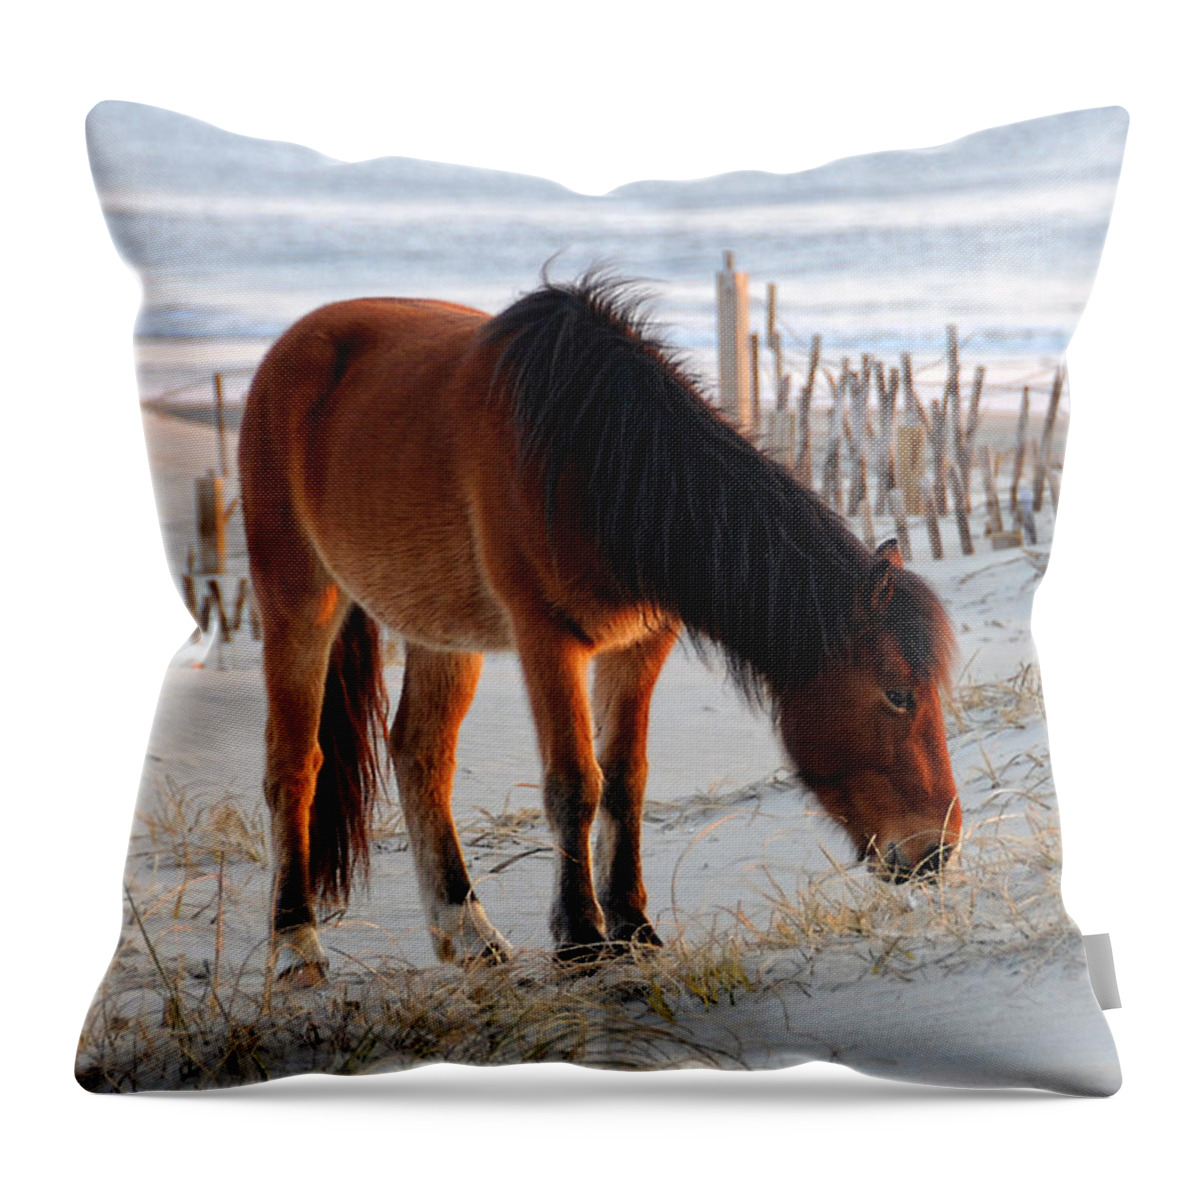 Horse Throw Pillow featuring the photograph Wild Horse At Sunrise by Liz Mackney